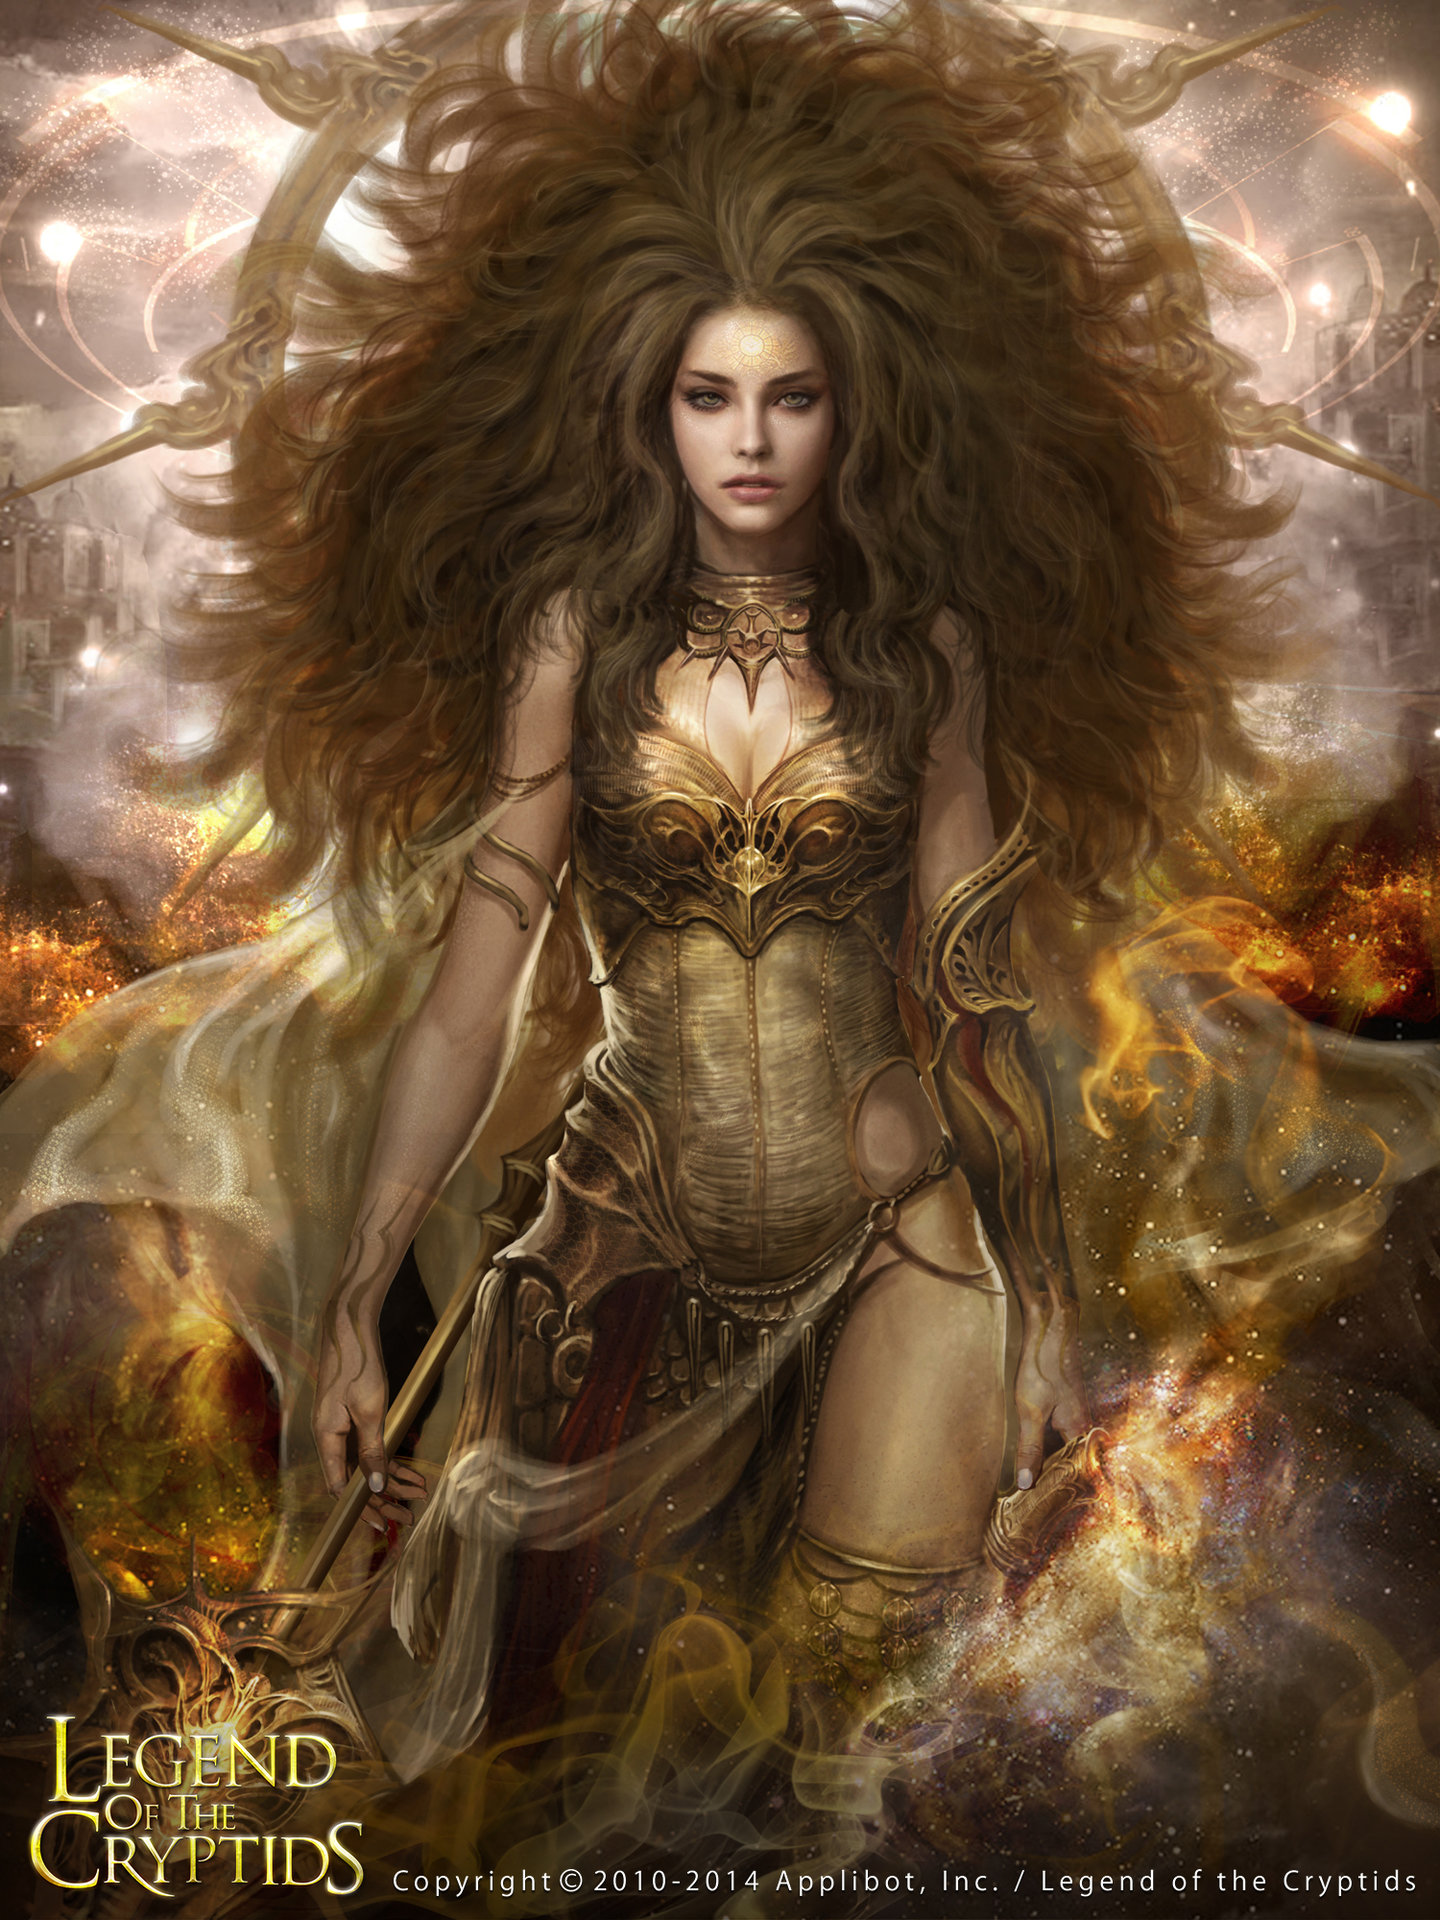 Daeho Cha Drawing Legend Of The Cryptids Women Brunette Long Hair Wavy Hair Warrior Armor Brown Clot 1440x1920